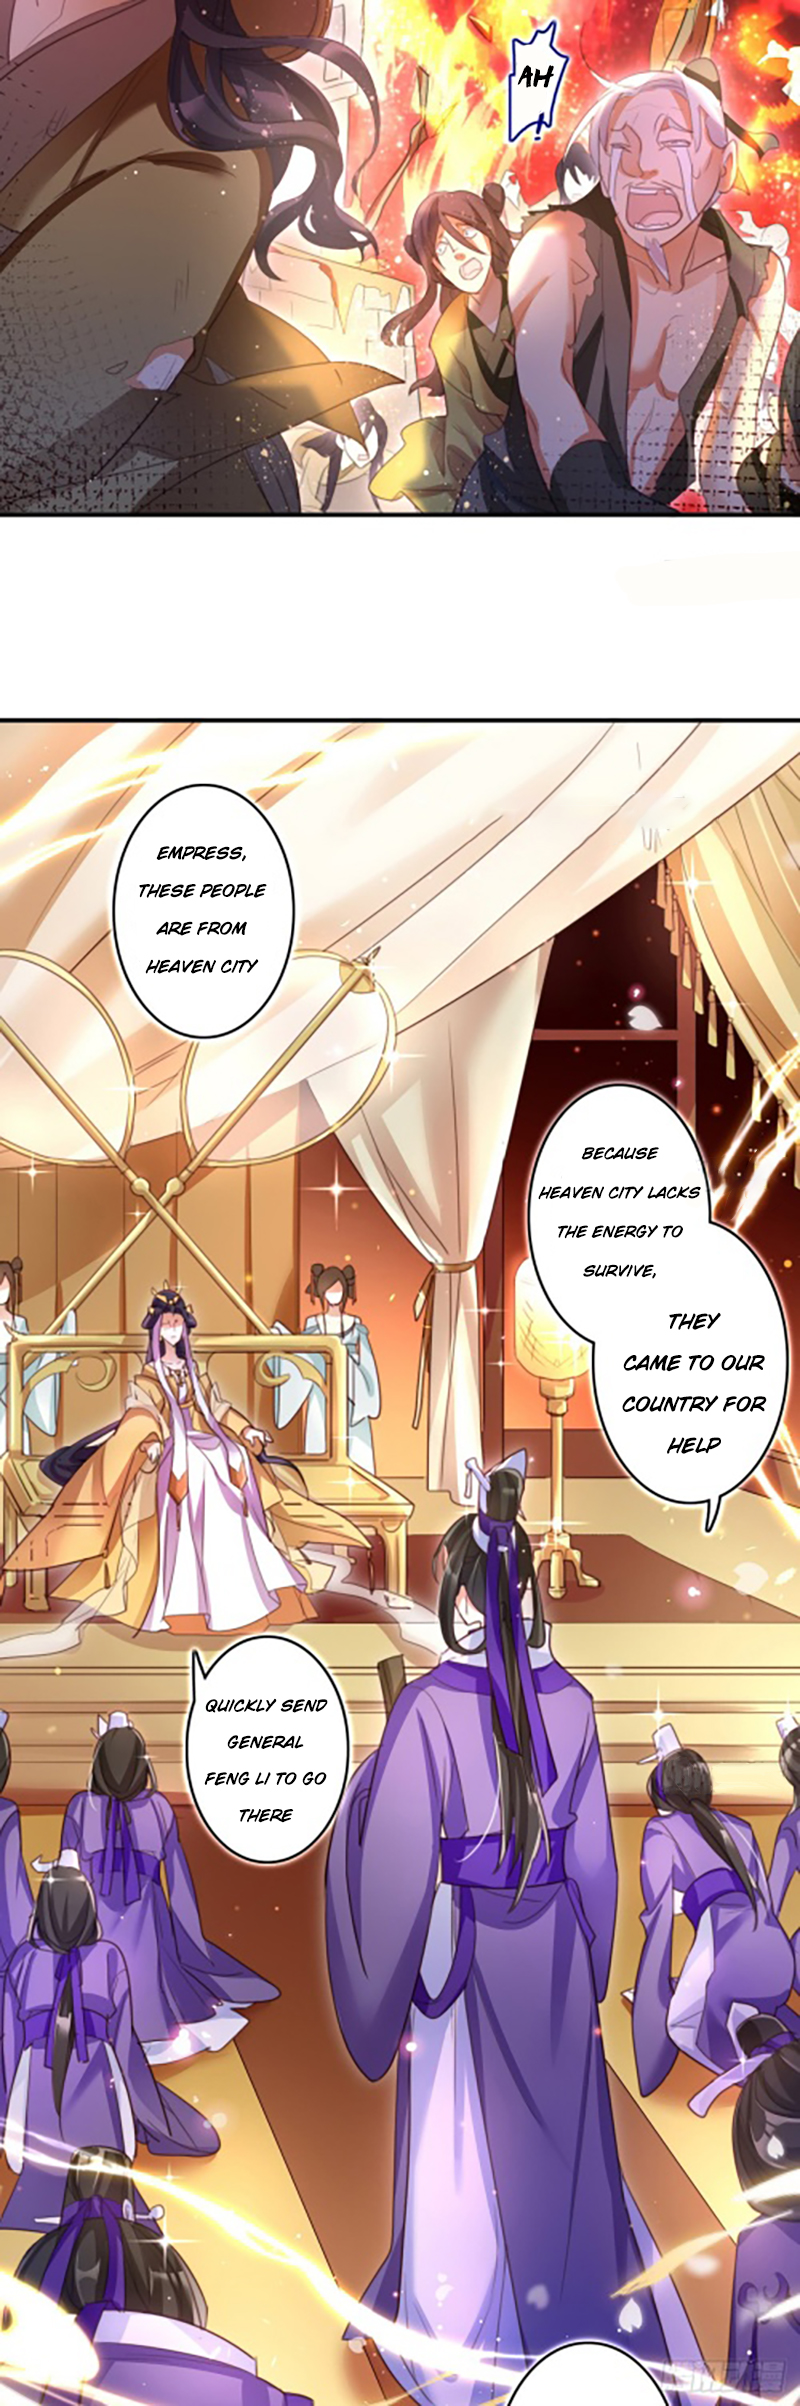 The Evil Girl is The Emperor Ch. 5 Still in The Mood to Visit The Brothel ?